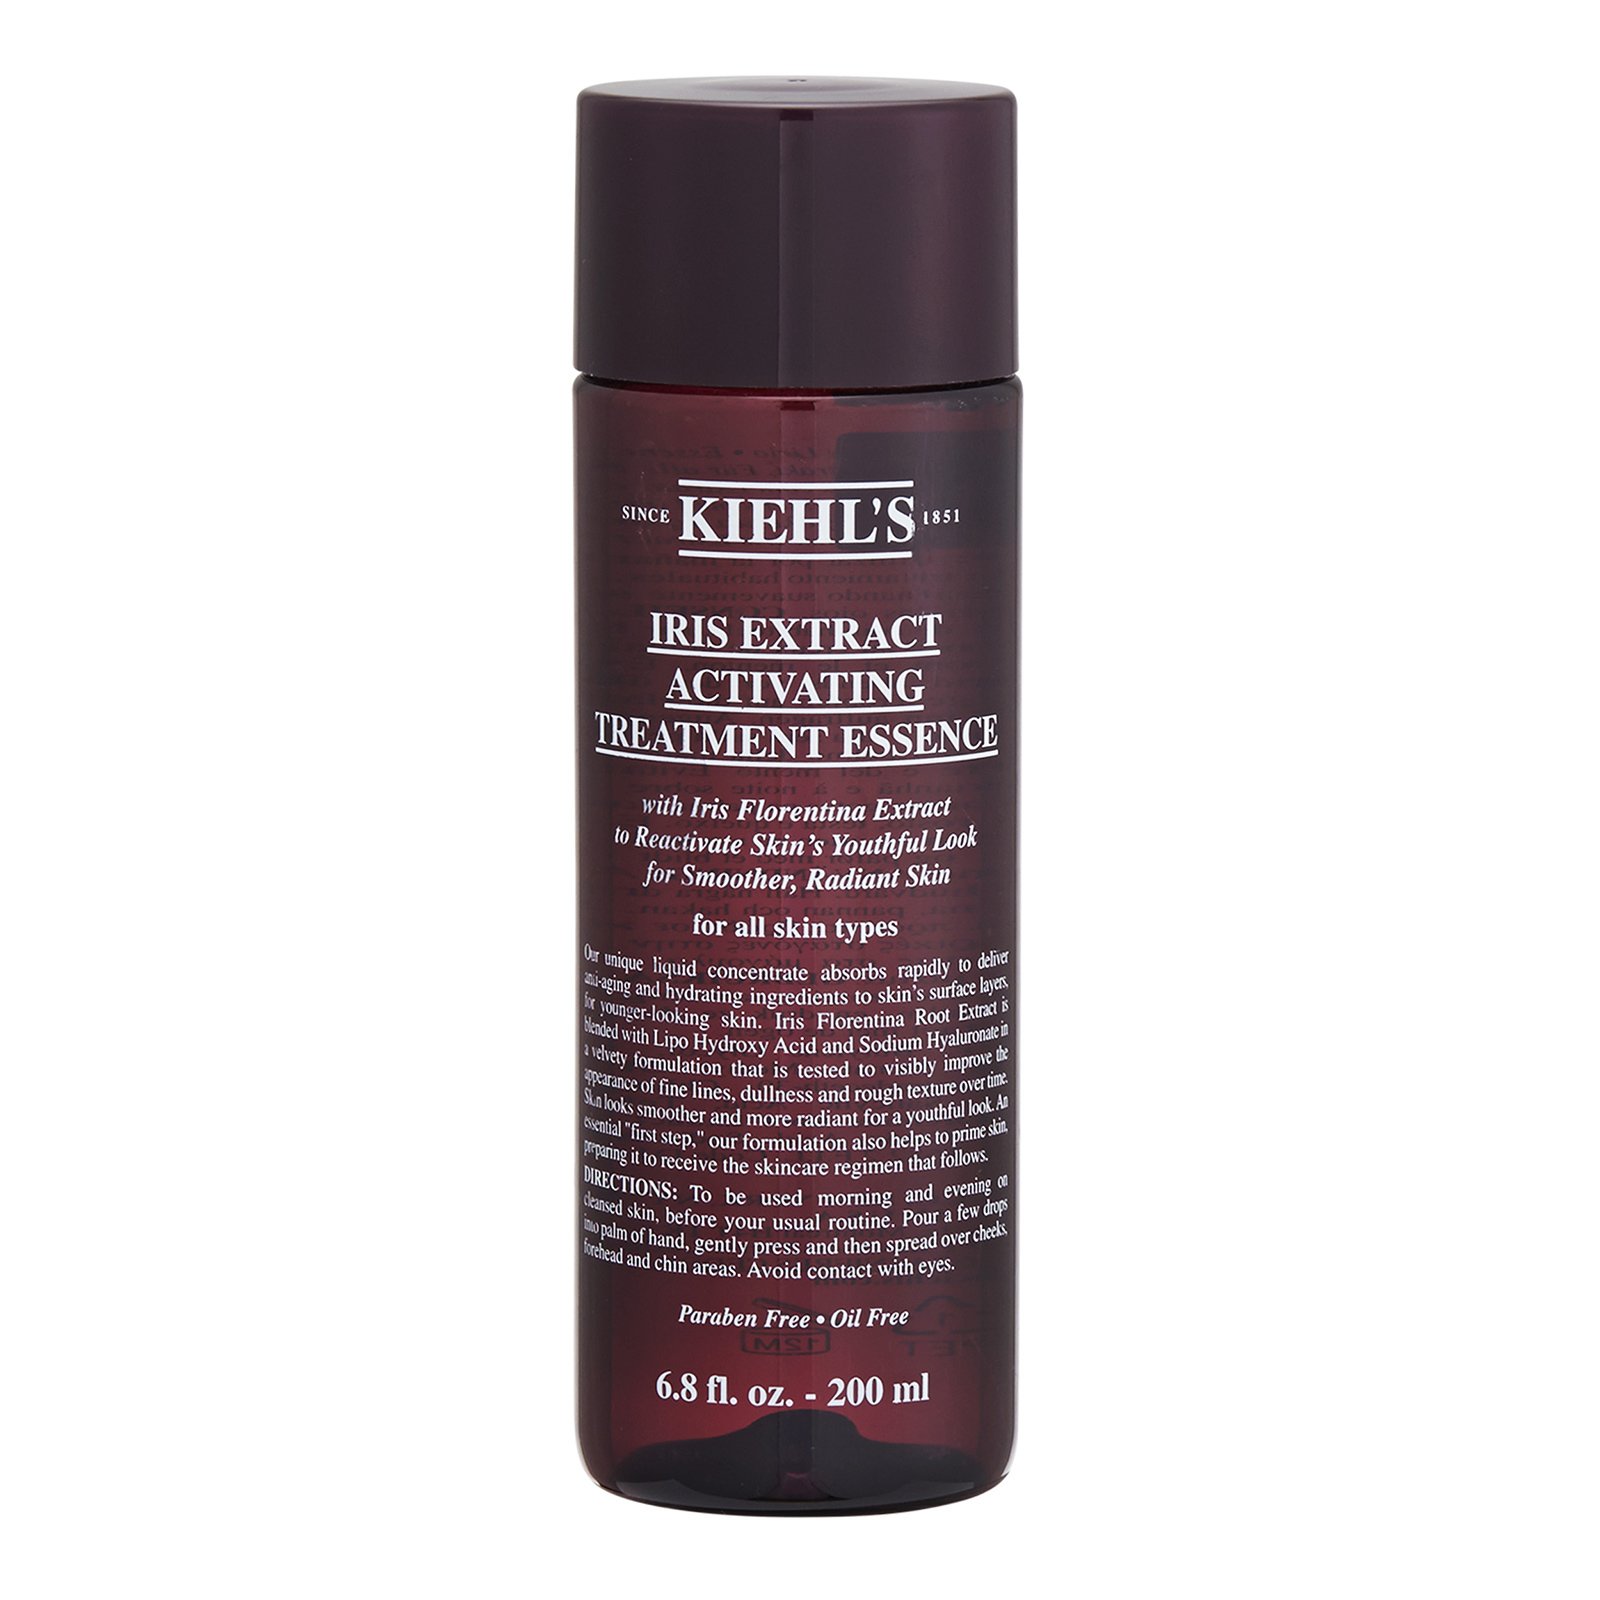 Iris Extract Activating Essence Treatment (For All Skin Types)